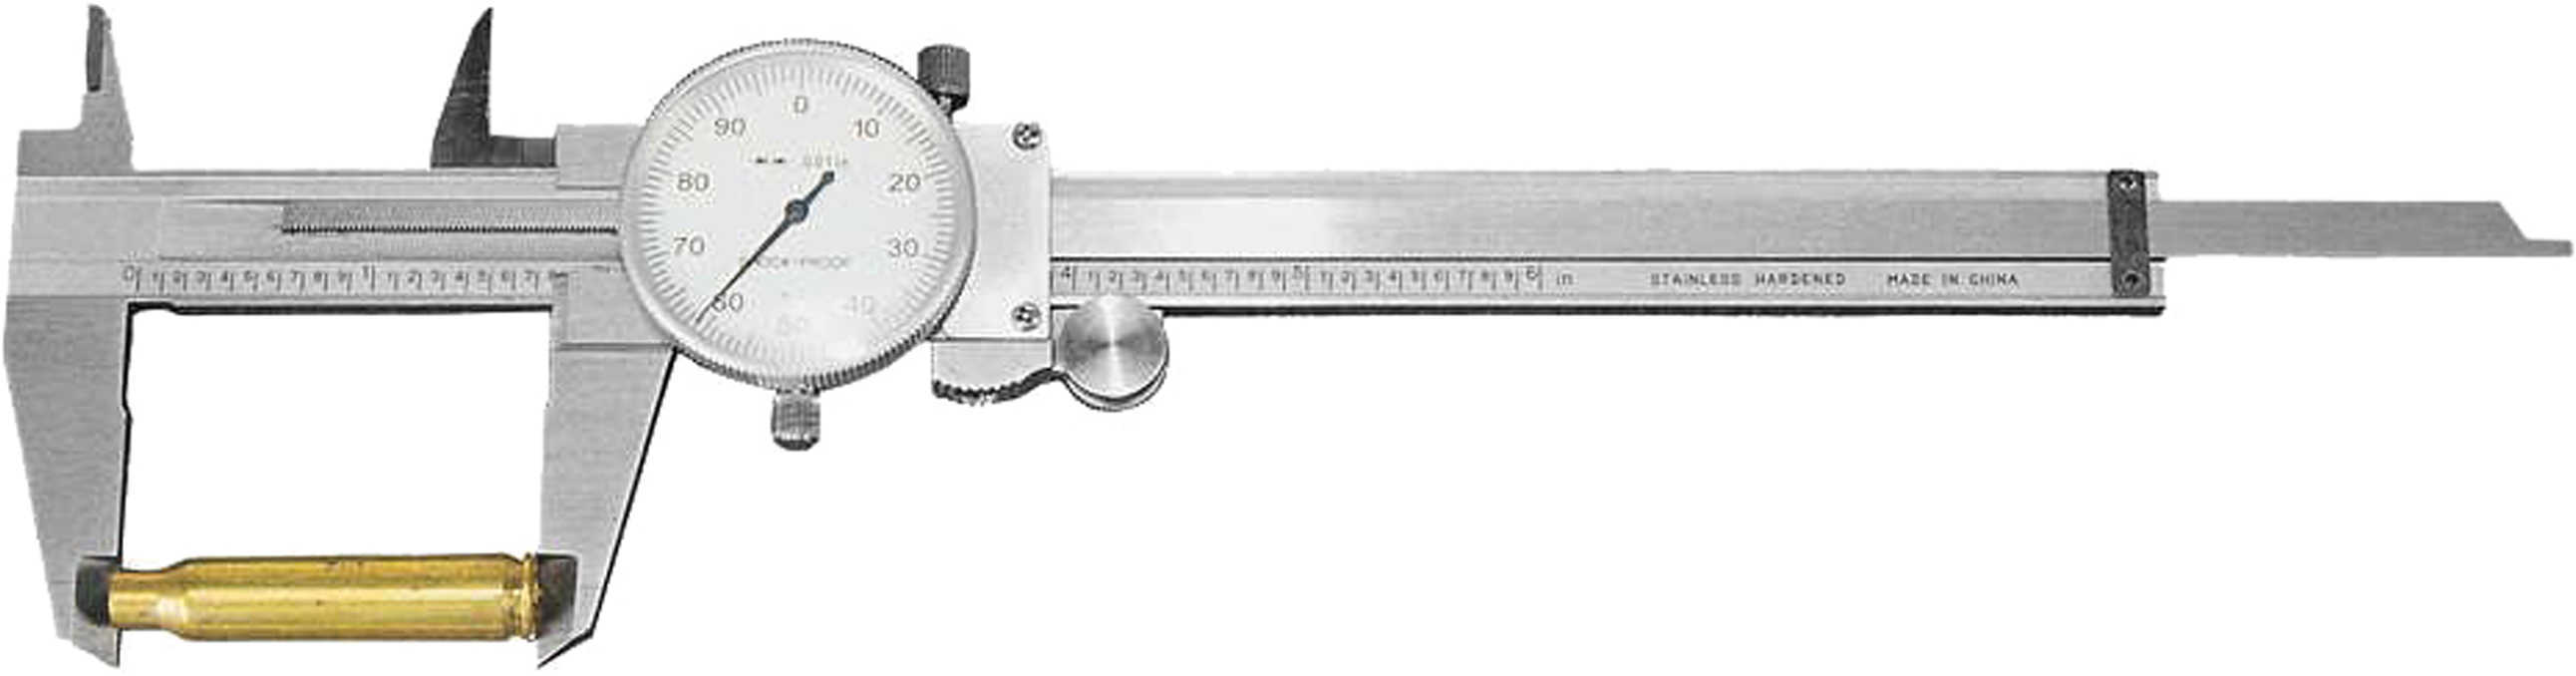 Frankford Arsenal Stainless Steel Dial Caliper Md: 516503